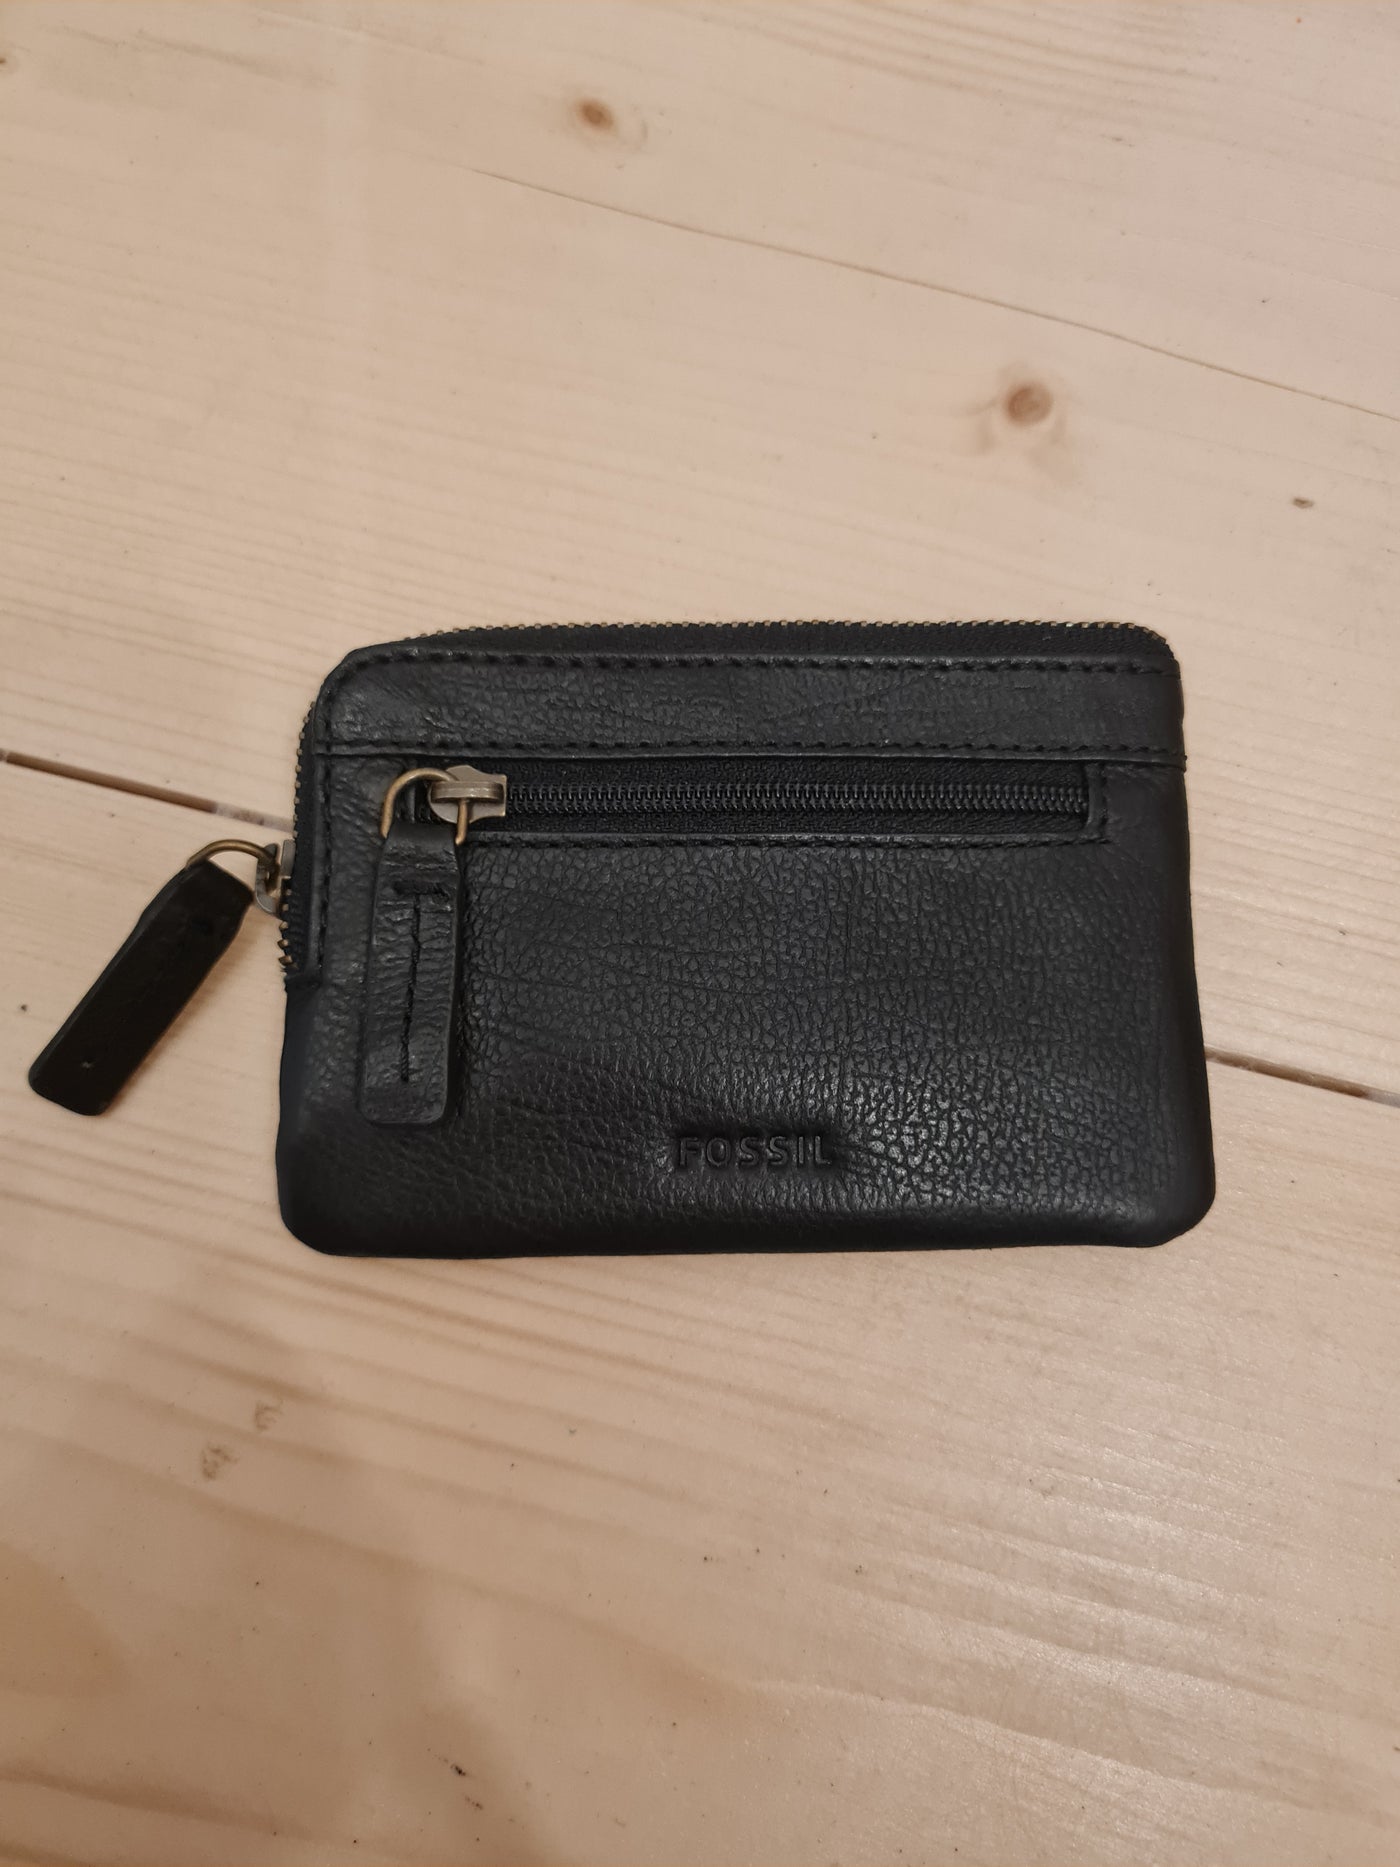 Fossil Black Leather Coin Purse New RRP £35